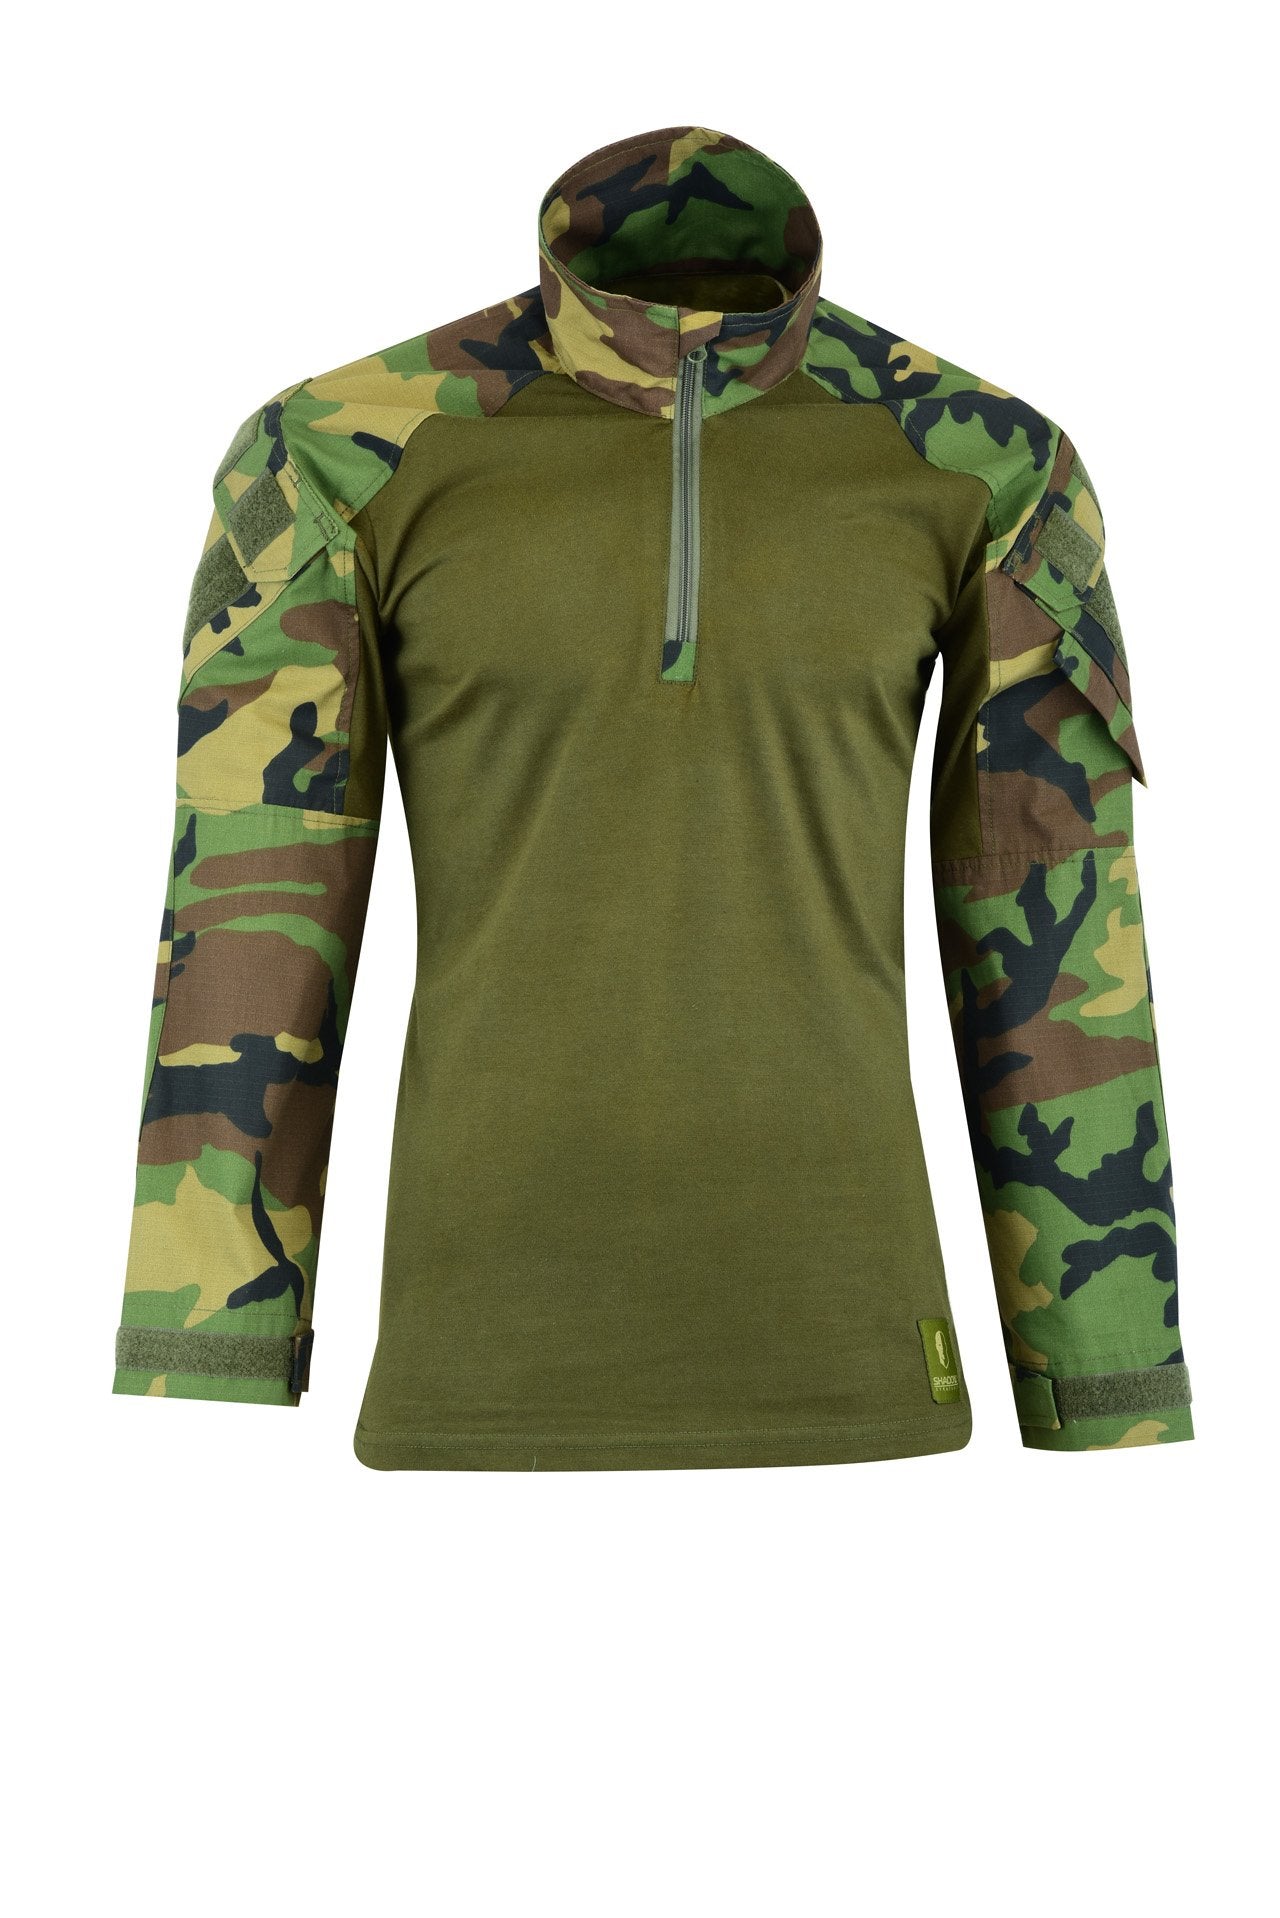 Tactical Zone HYBRID TACTICAL SHIRT IS A PERFECT COMBAT SHIRT Colour  Woodland Camo